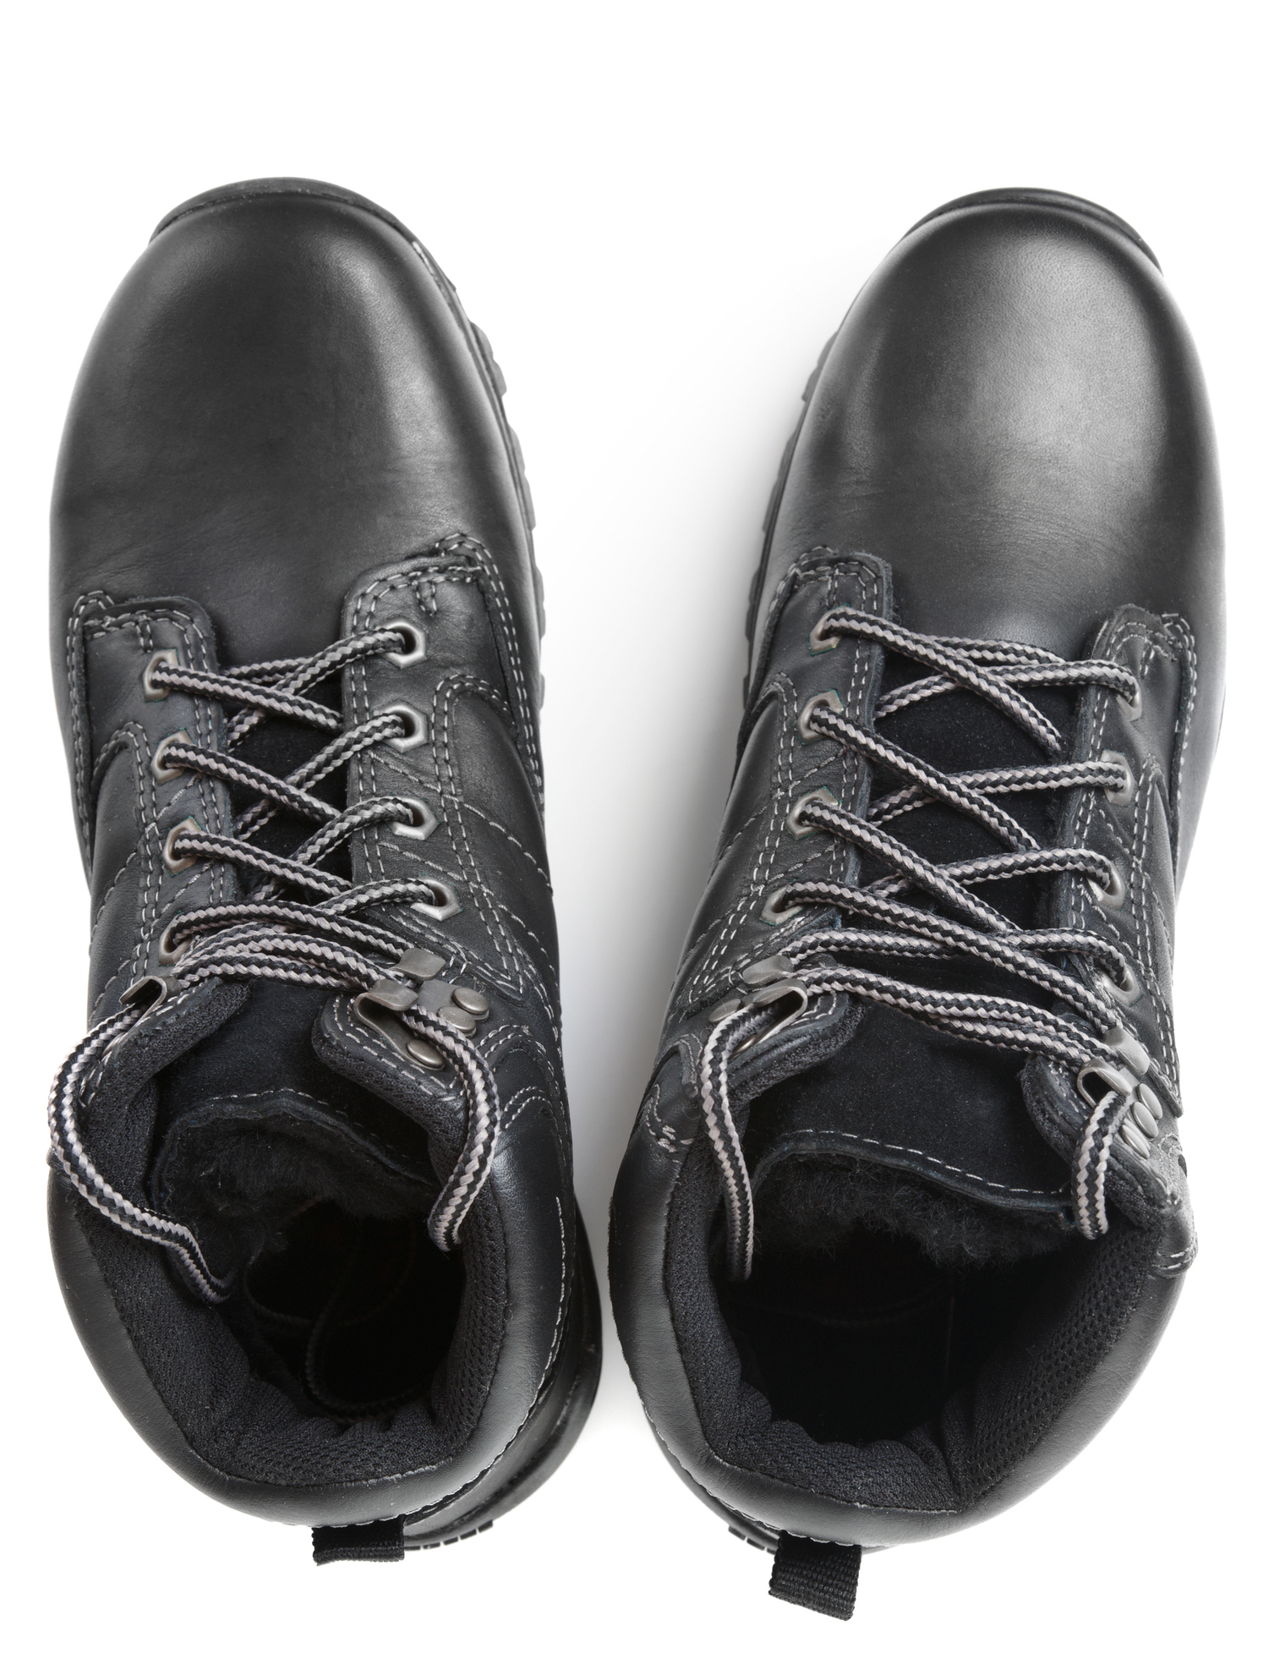 How to Clean Leather Shoes with Vinegar - Home Quicks